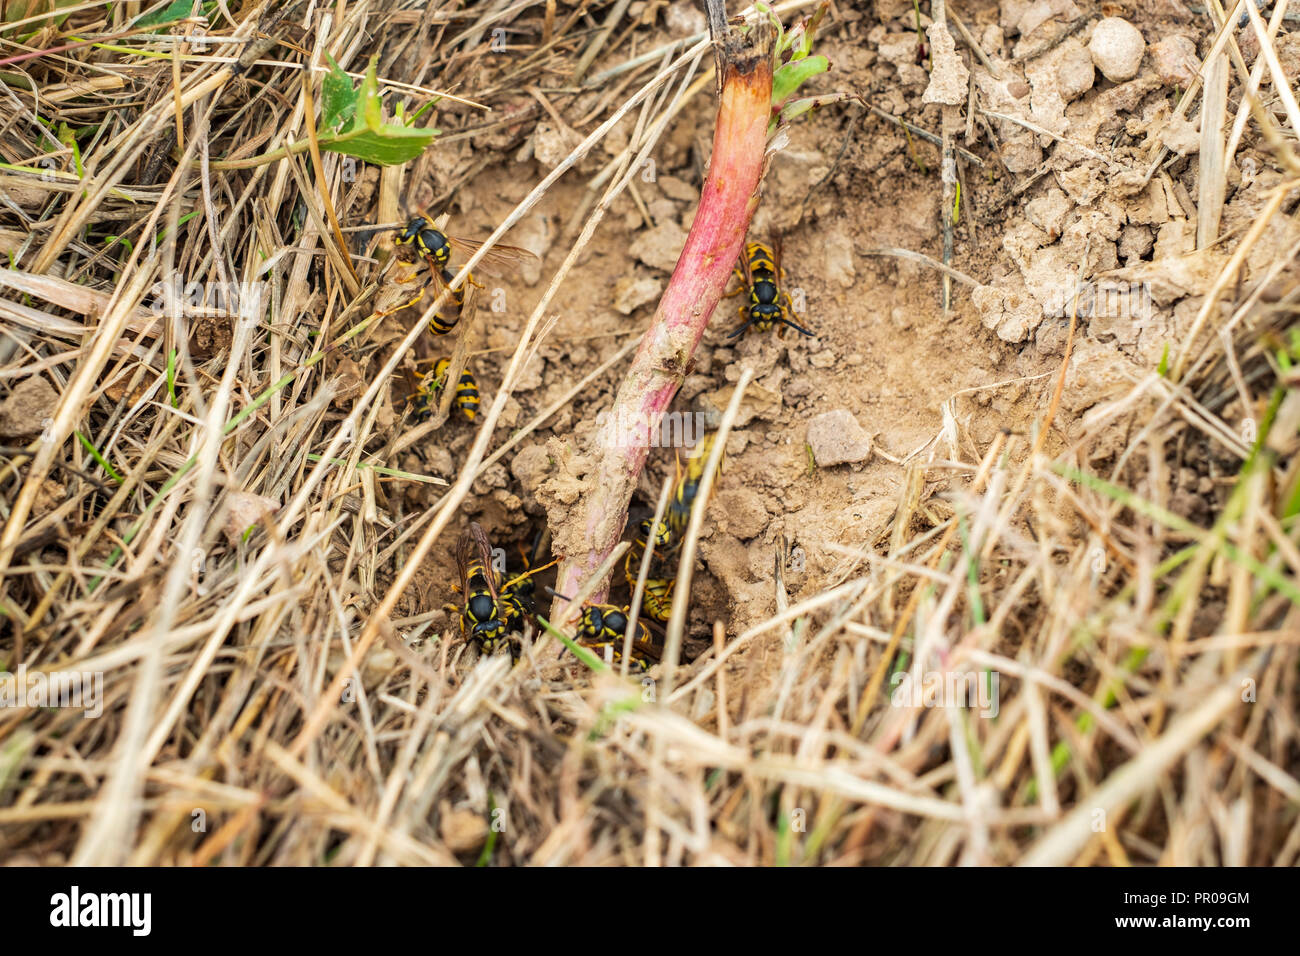 Wasps and vespiary in the earth. Stock Photo